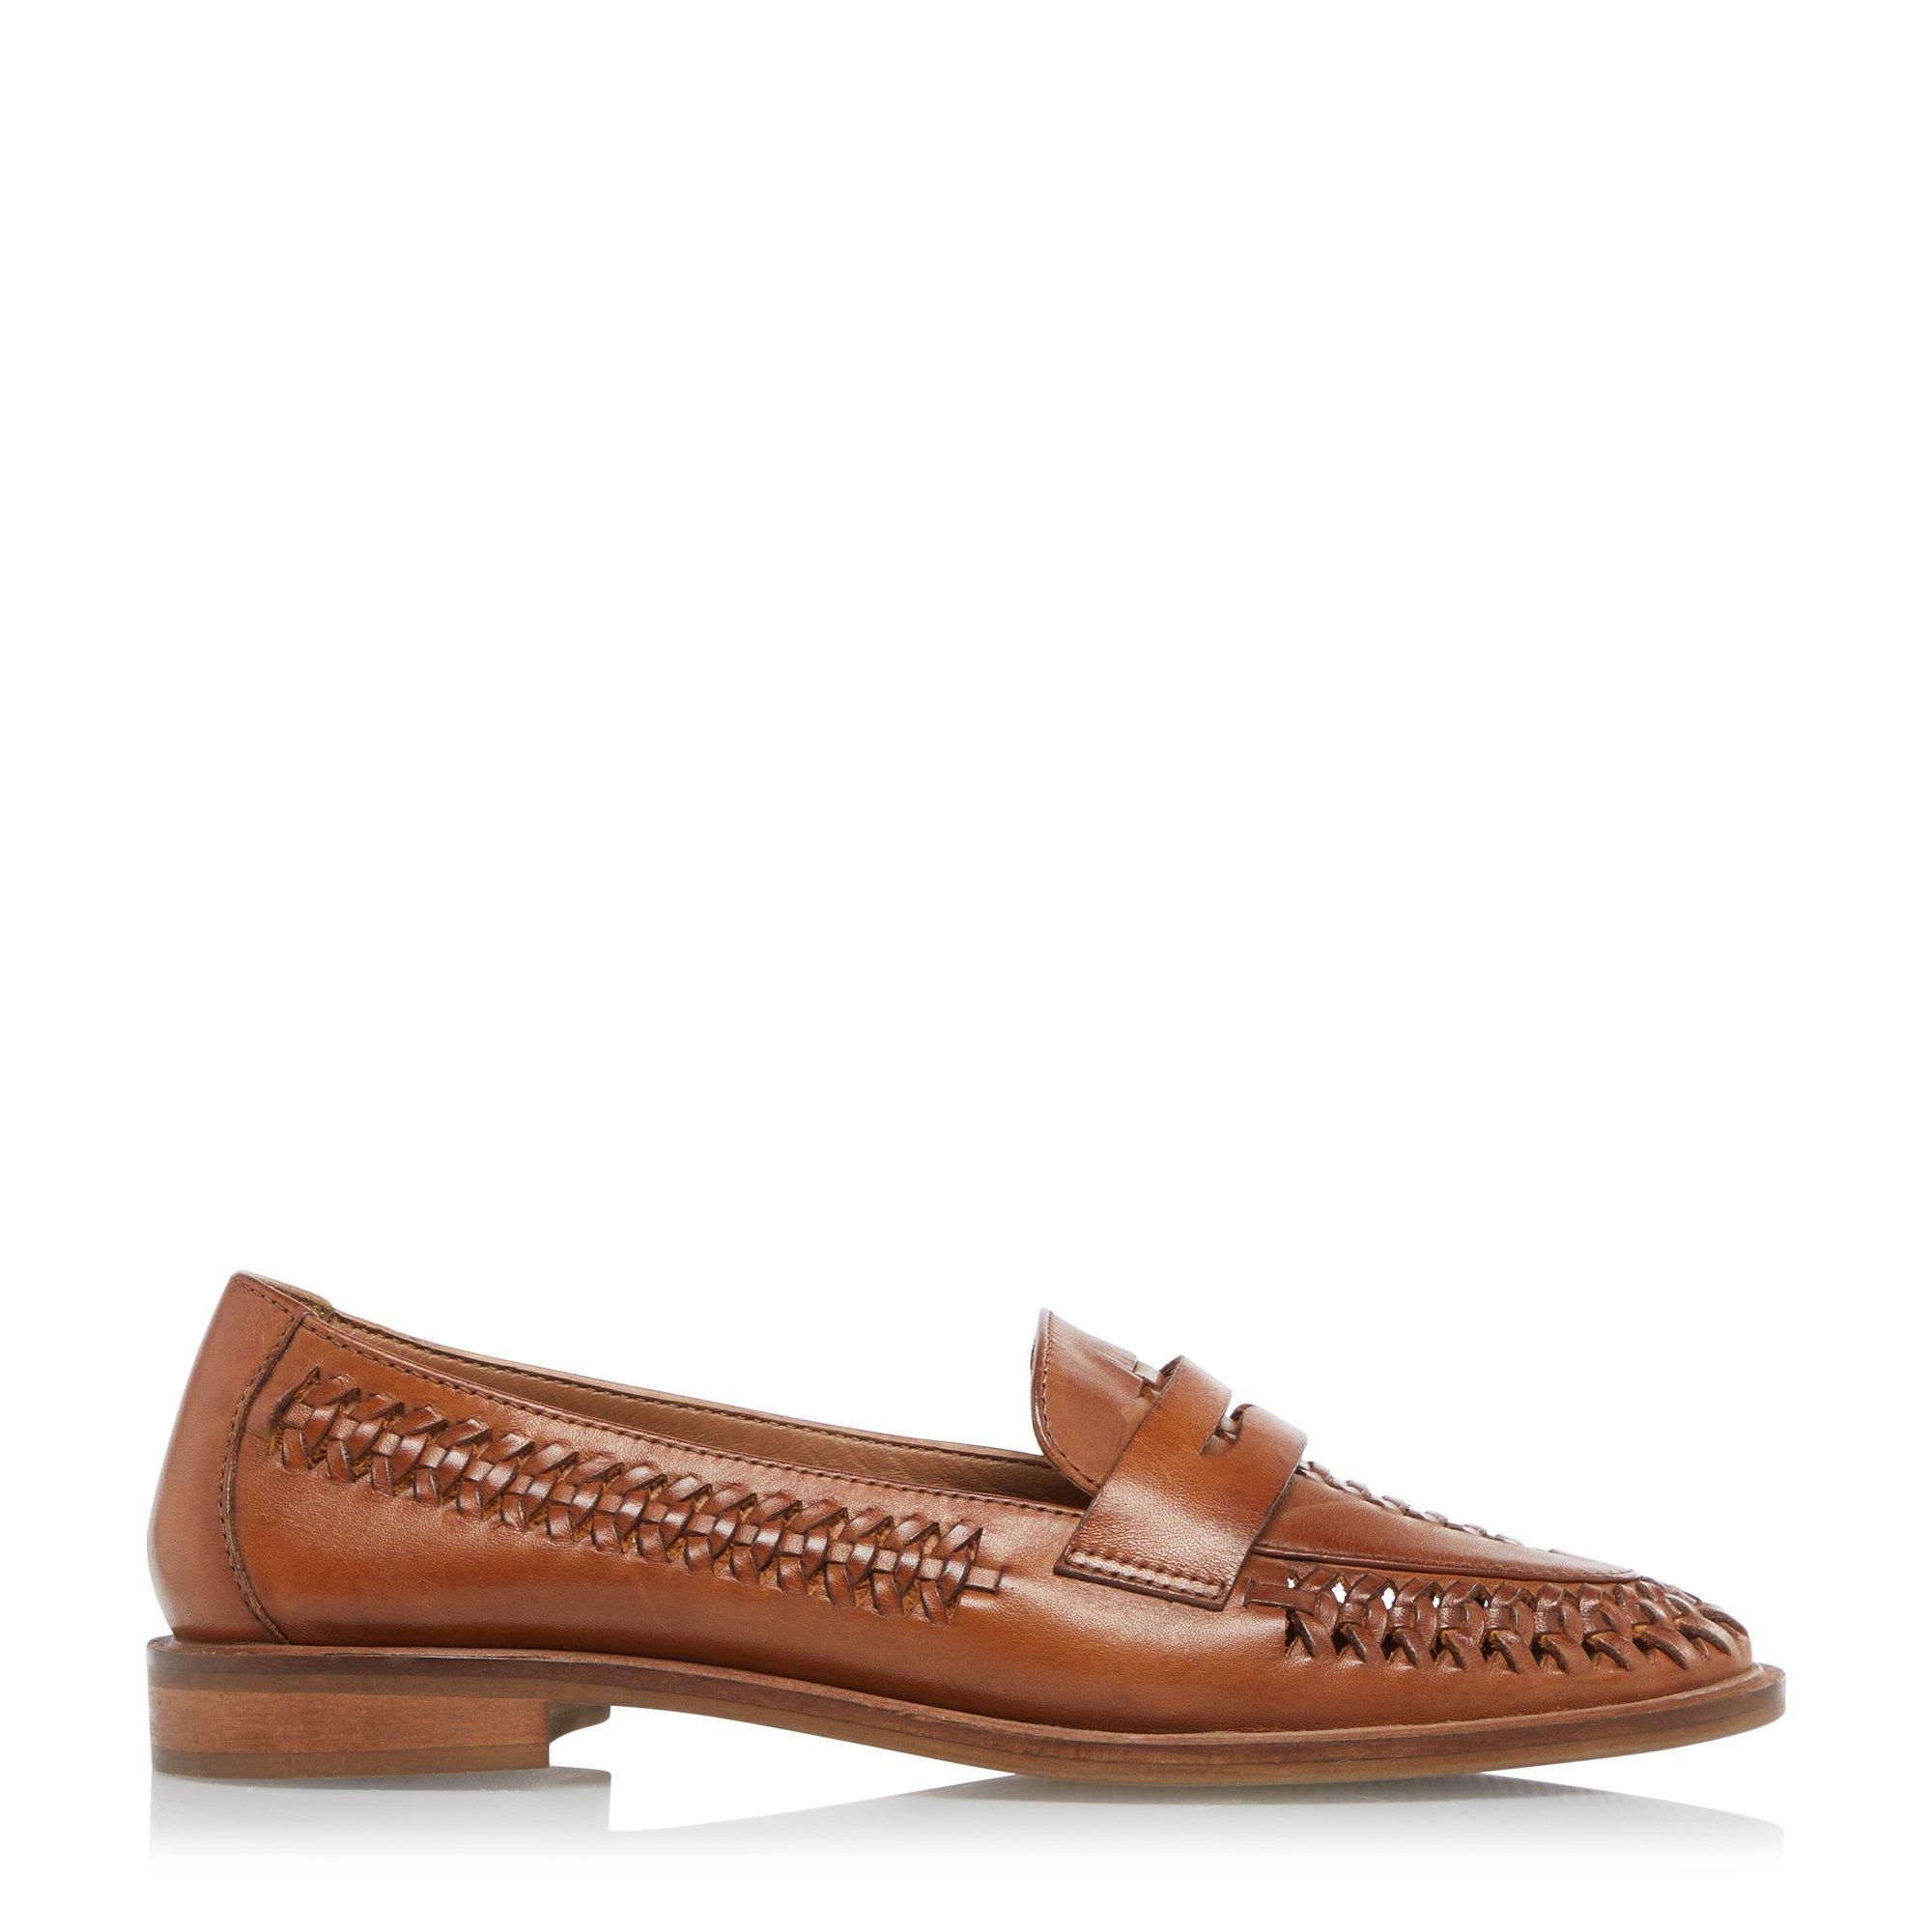 These call for a wardrobe update. Easy to slip on and go, you'll wear these woven loafers with everything. With endless styling possibilities, they're the ultimate all rounder.